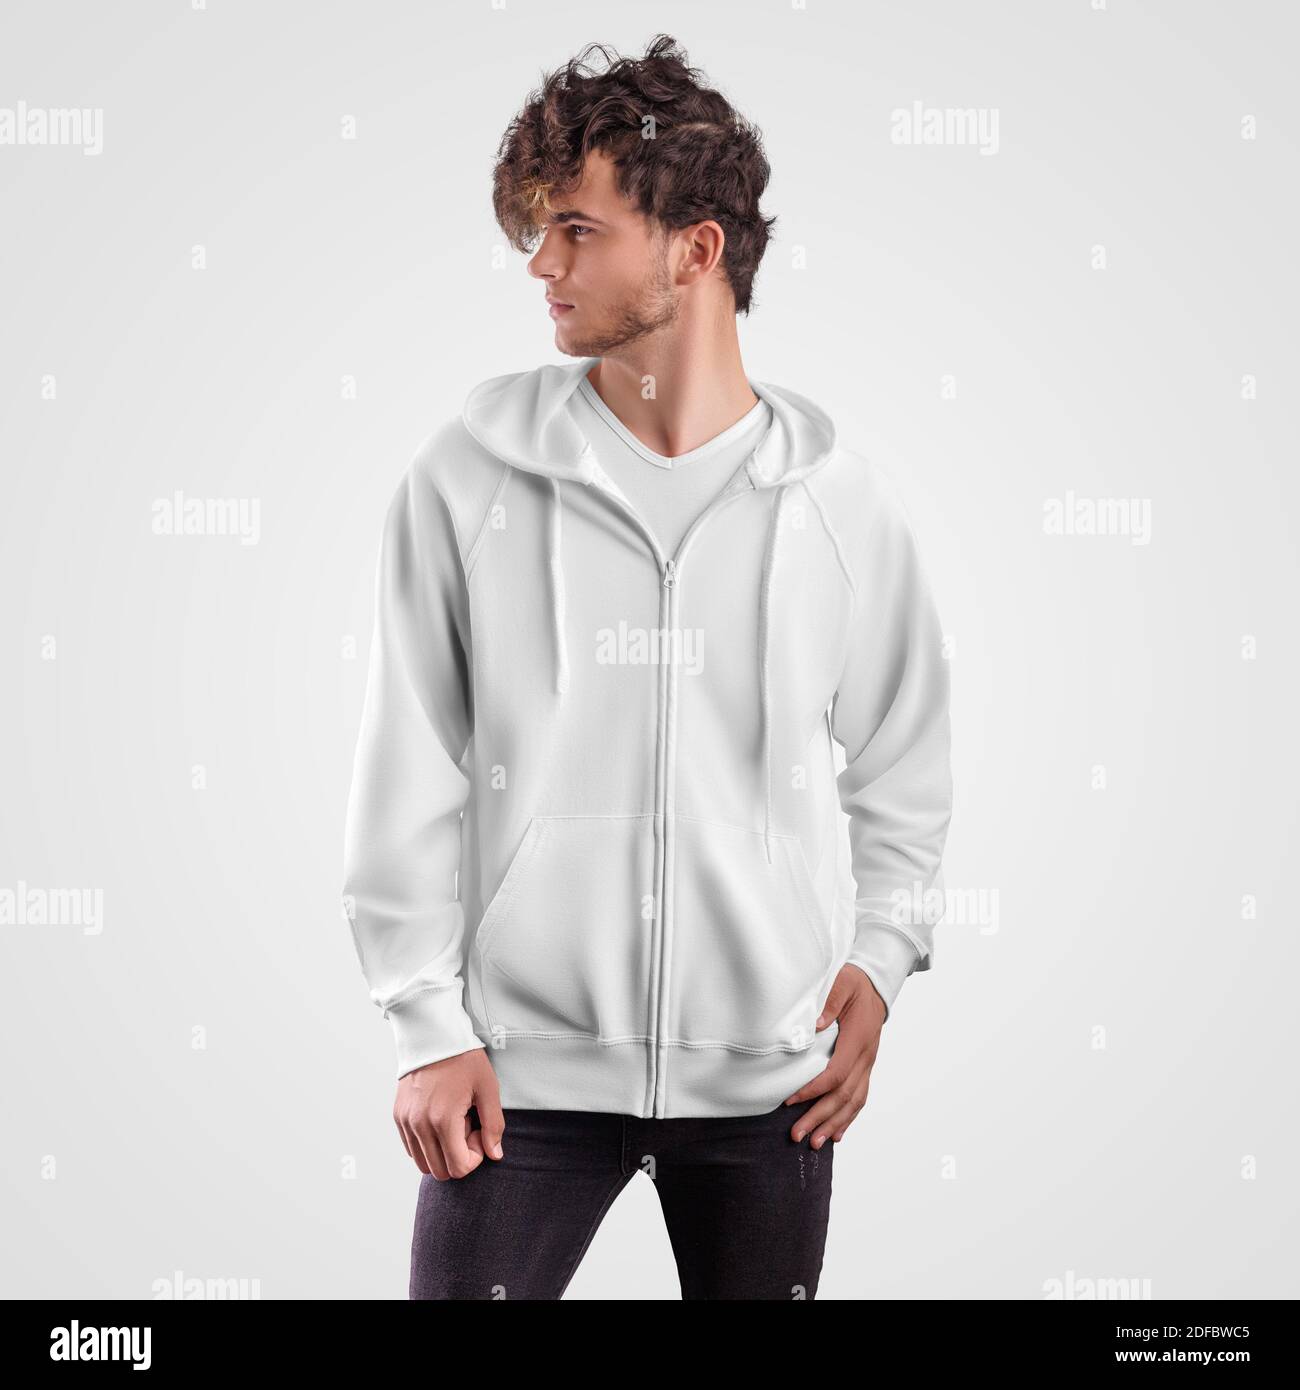 Download Mockup White Hoodie With Drawstring Hood Pockets And Zippers On Guy Front View Blank Sweatshirt For Design Presentation Men S Clothing Template Is Stock Photo Alamy